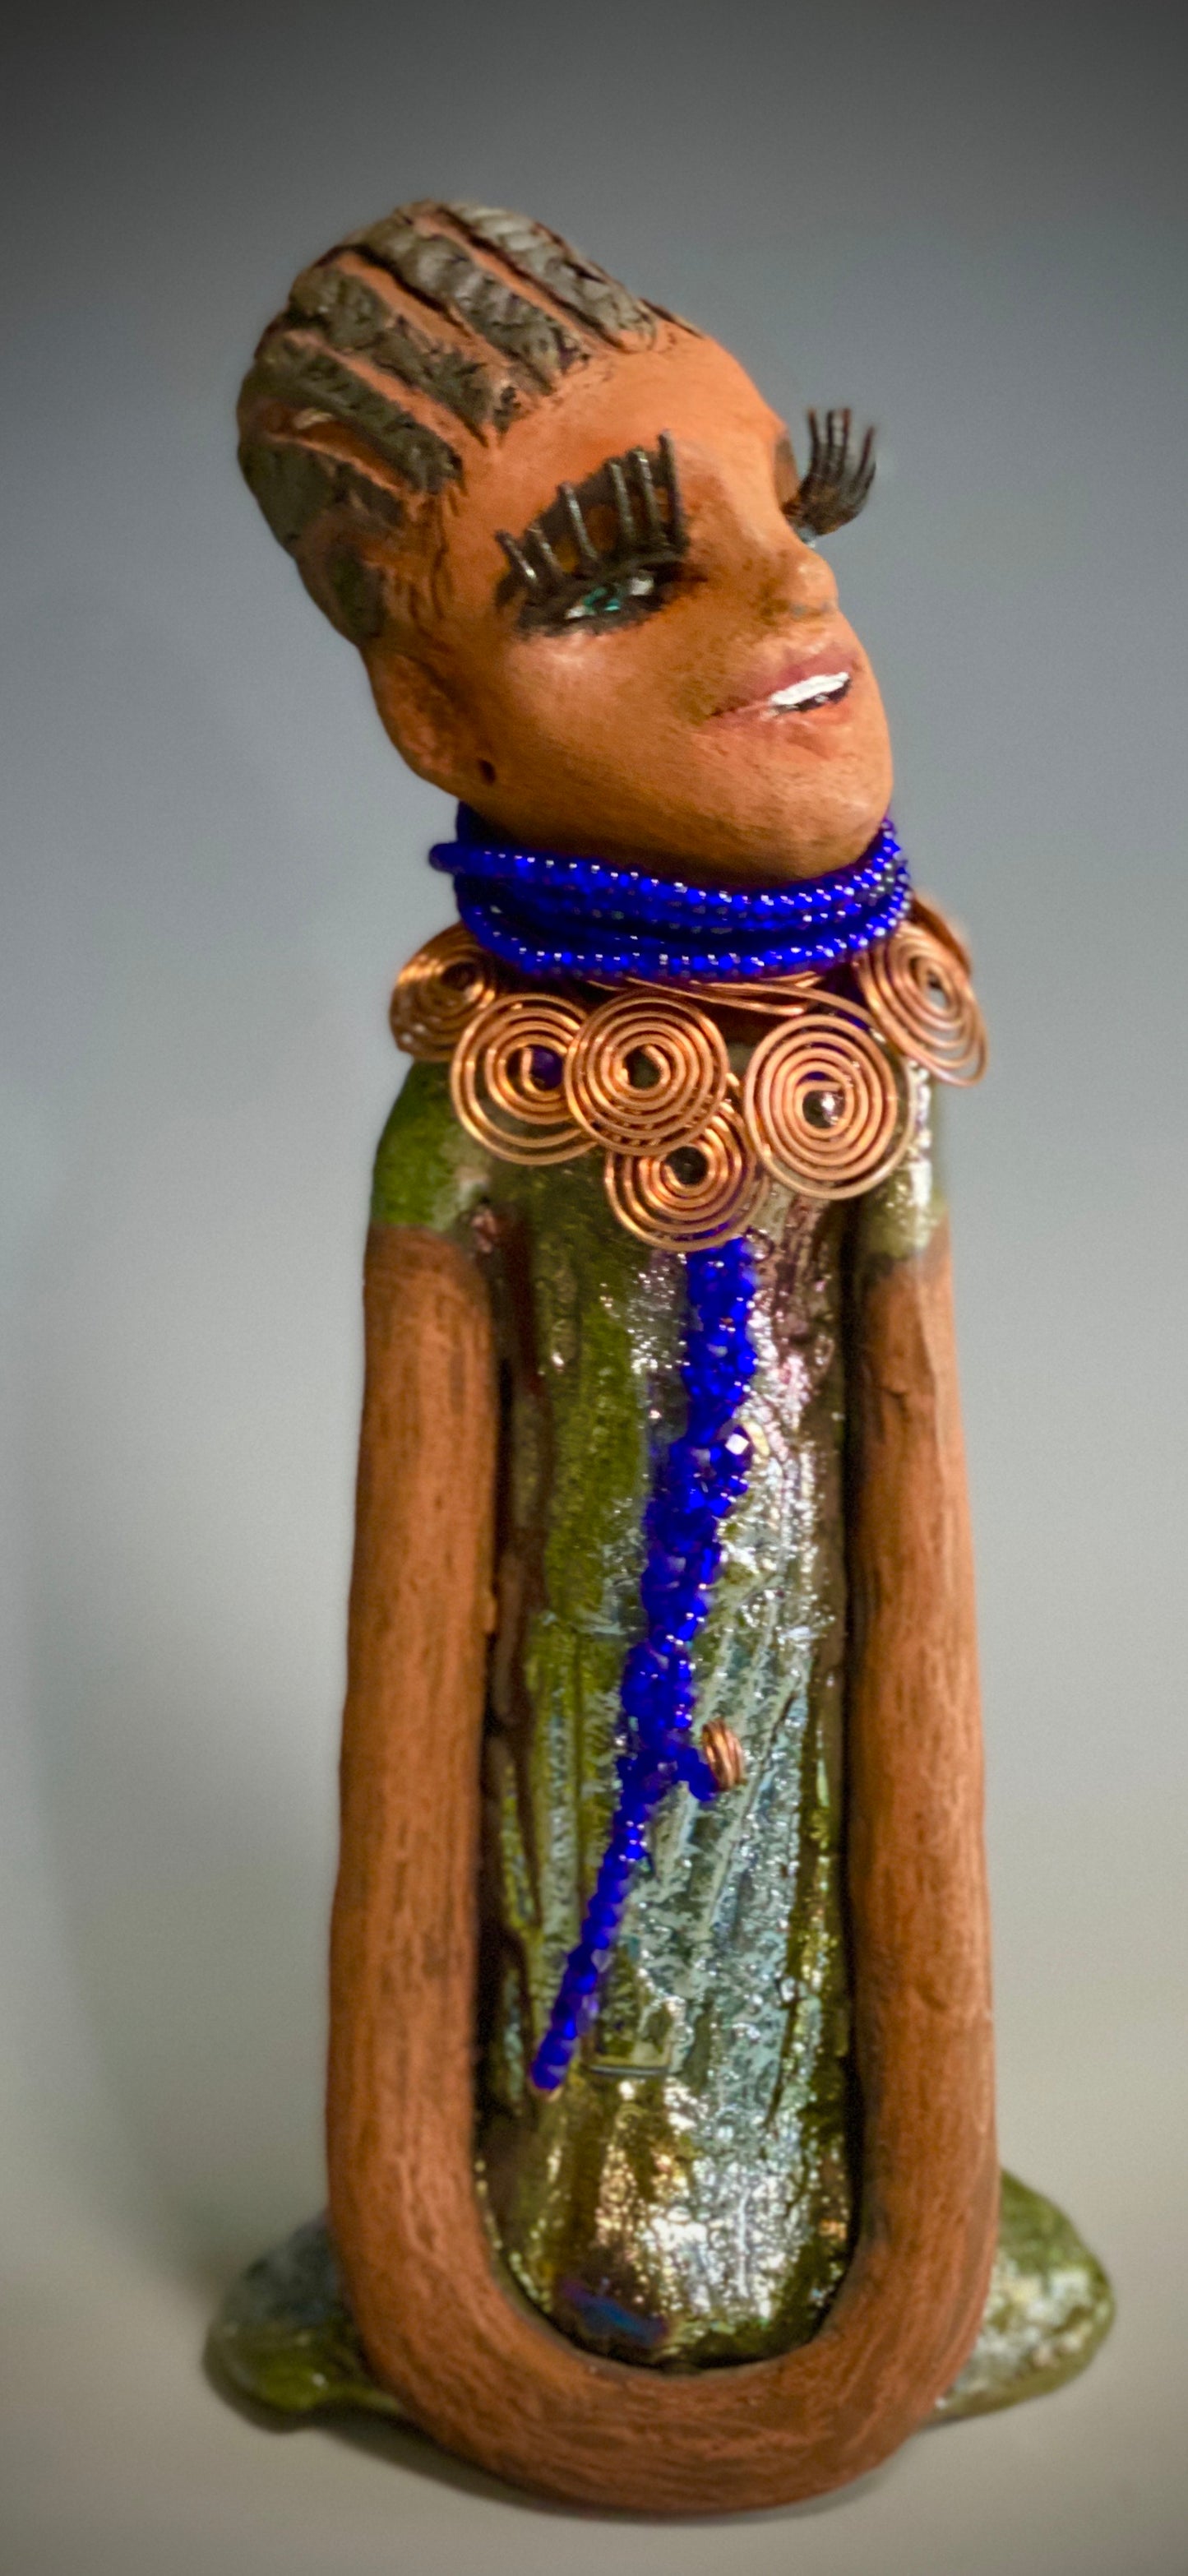 Meet Ophelia! Ophelia stands 7.5" x 4" x 5" and weighs 1.02  lbs. She has a lovely honey brown complexion with reddish brown lips. She has a short braided hairstyle.  Ophelia has a colorful metallic antique copper glazed dress. She wears spiral copper wire necklaces on top of an aqua blue beaded collar. Ophelia long loving arms rest at her side. With accent blue eye shadow and eyes wide opened, Ophelia has hopes of finding  her way into your home!